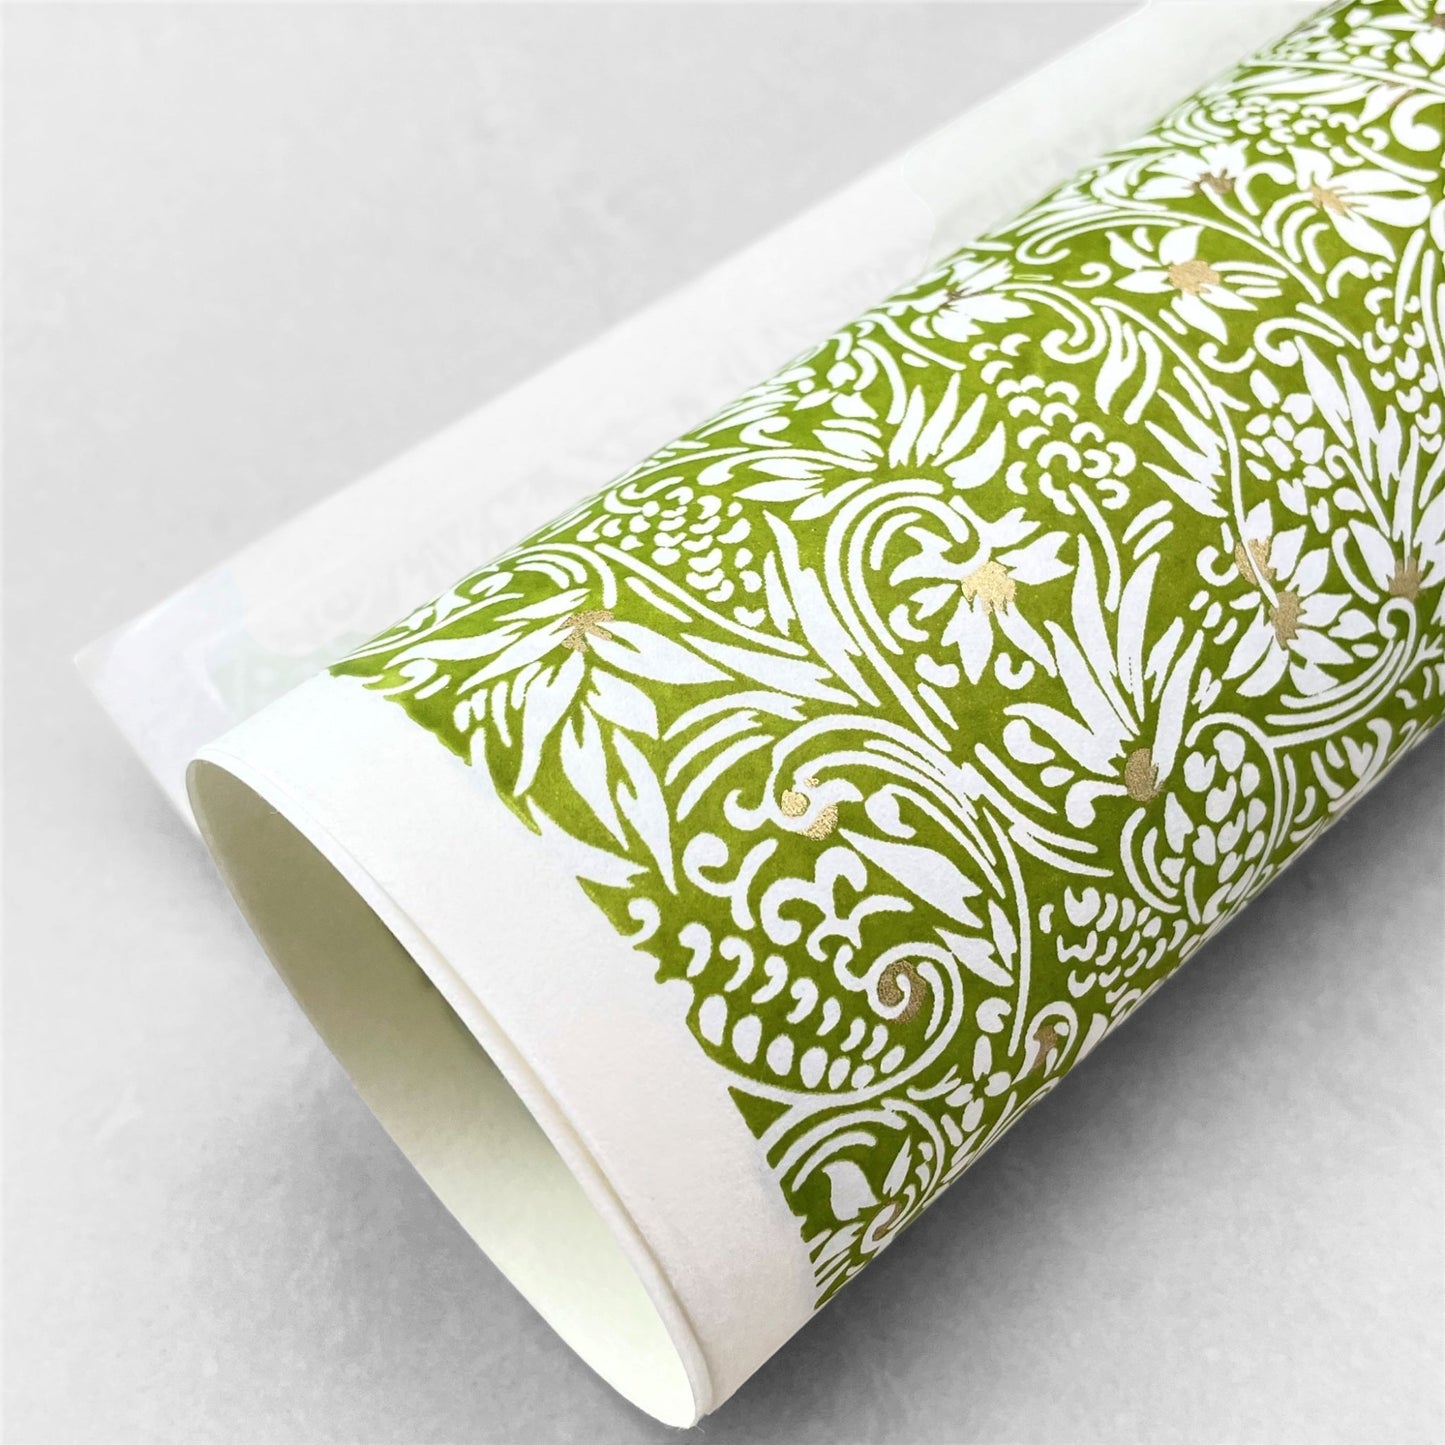 japanese silk-screen handmade paper showing green and white botanical repeat pattern with gold highlights